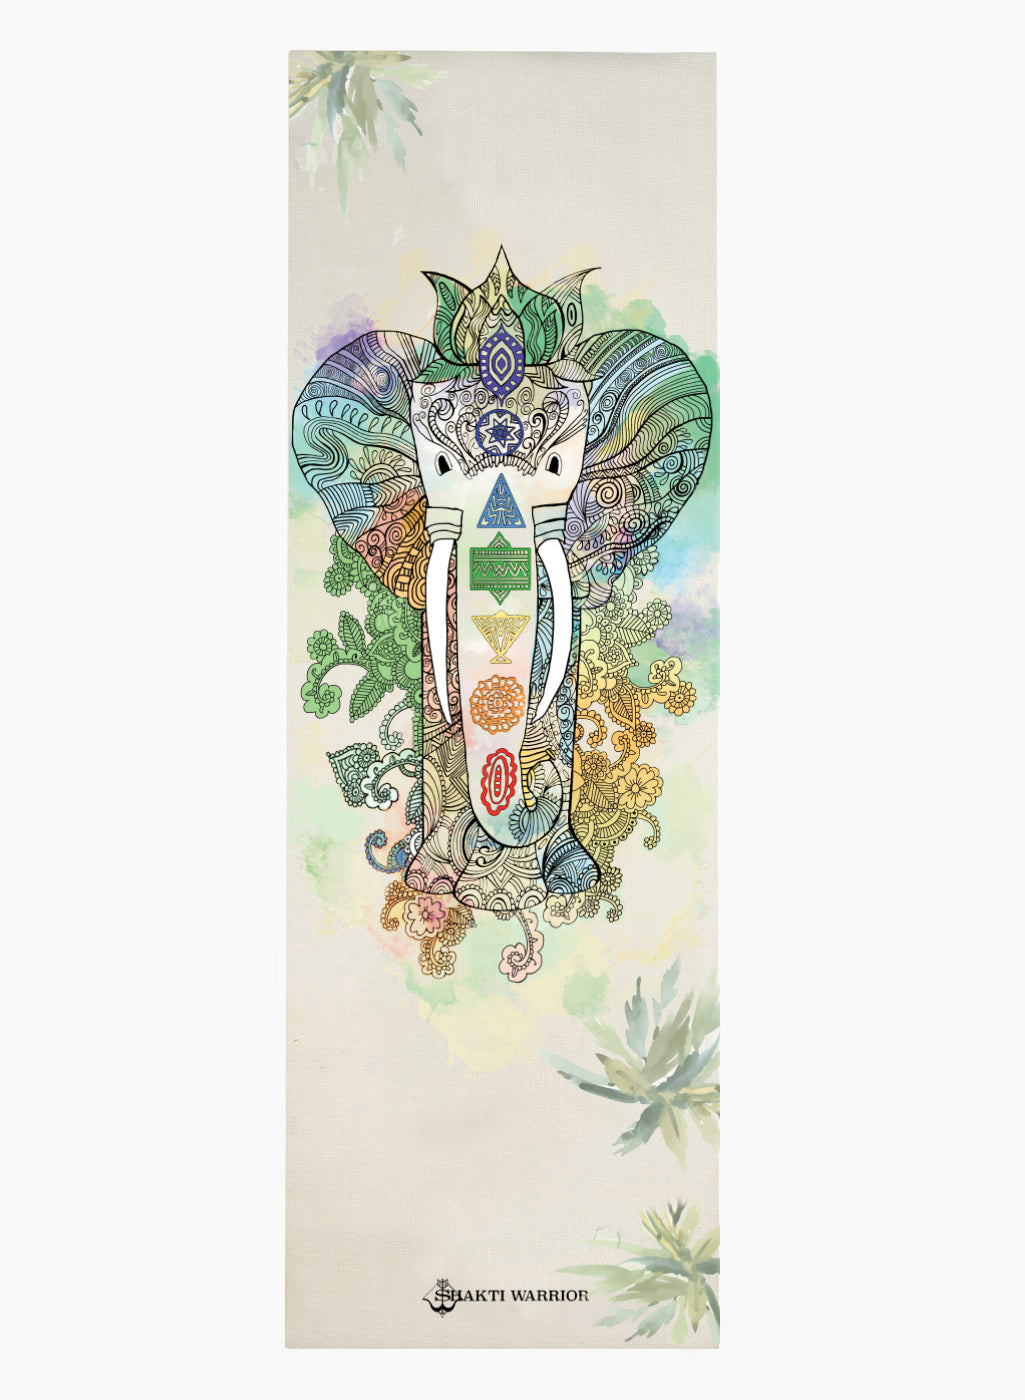 Shakti Warrior Elephant-Inspired TPE Yoga Mat - Eco-friendly, 6mm cushioning, and non-slip grip. Connect with strength and grace in your practice